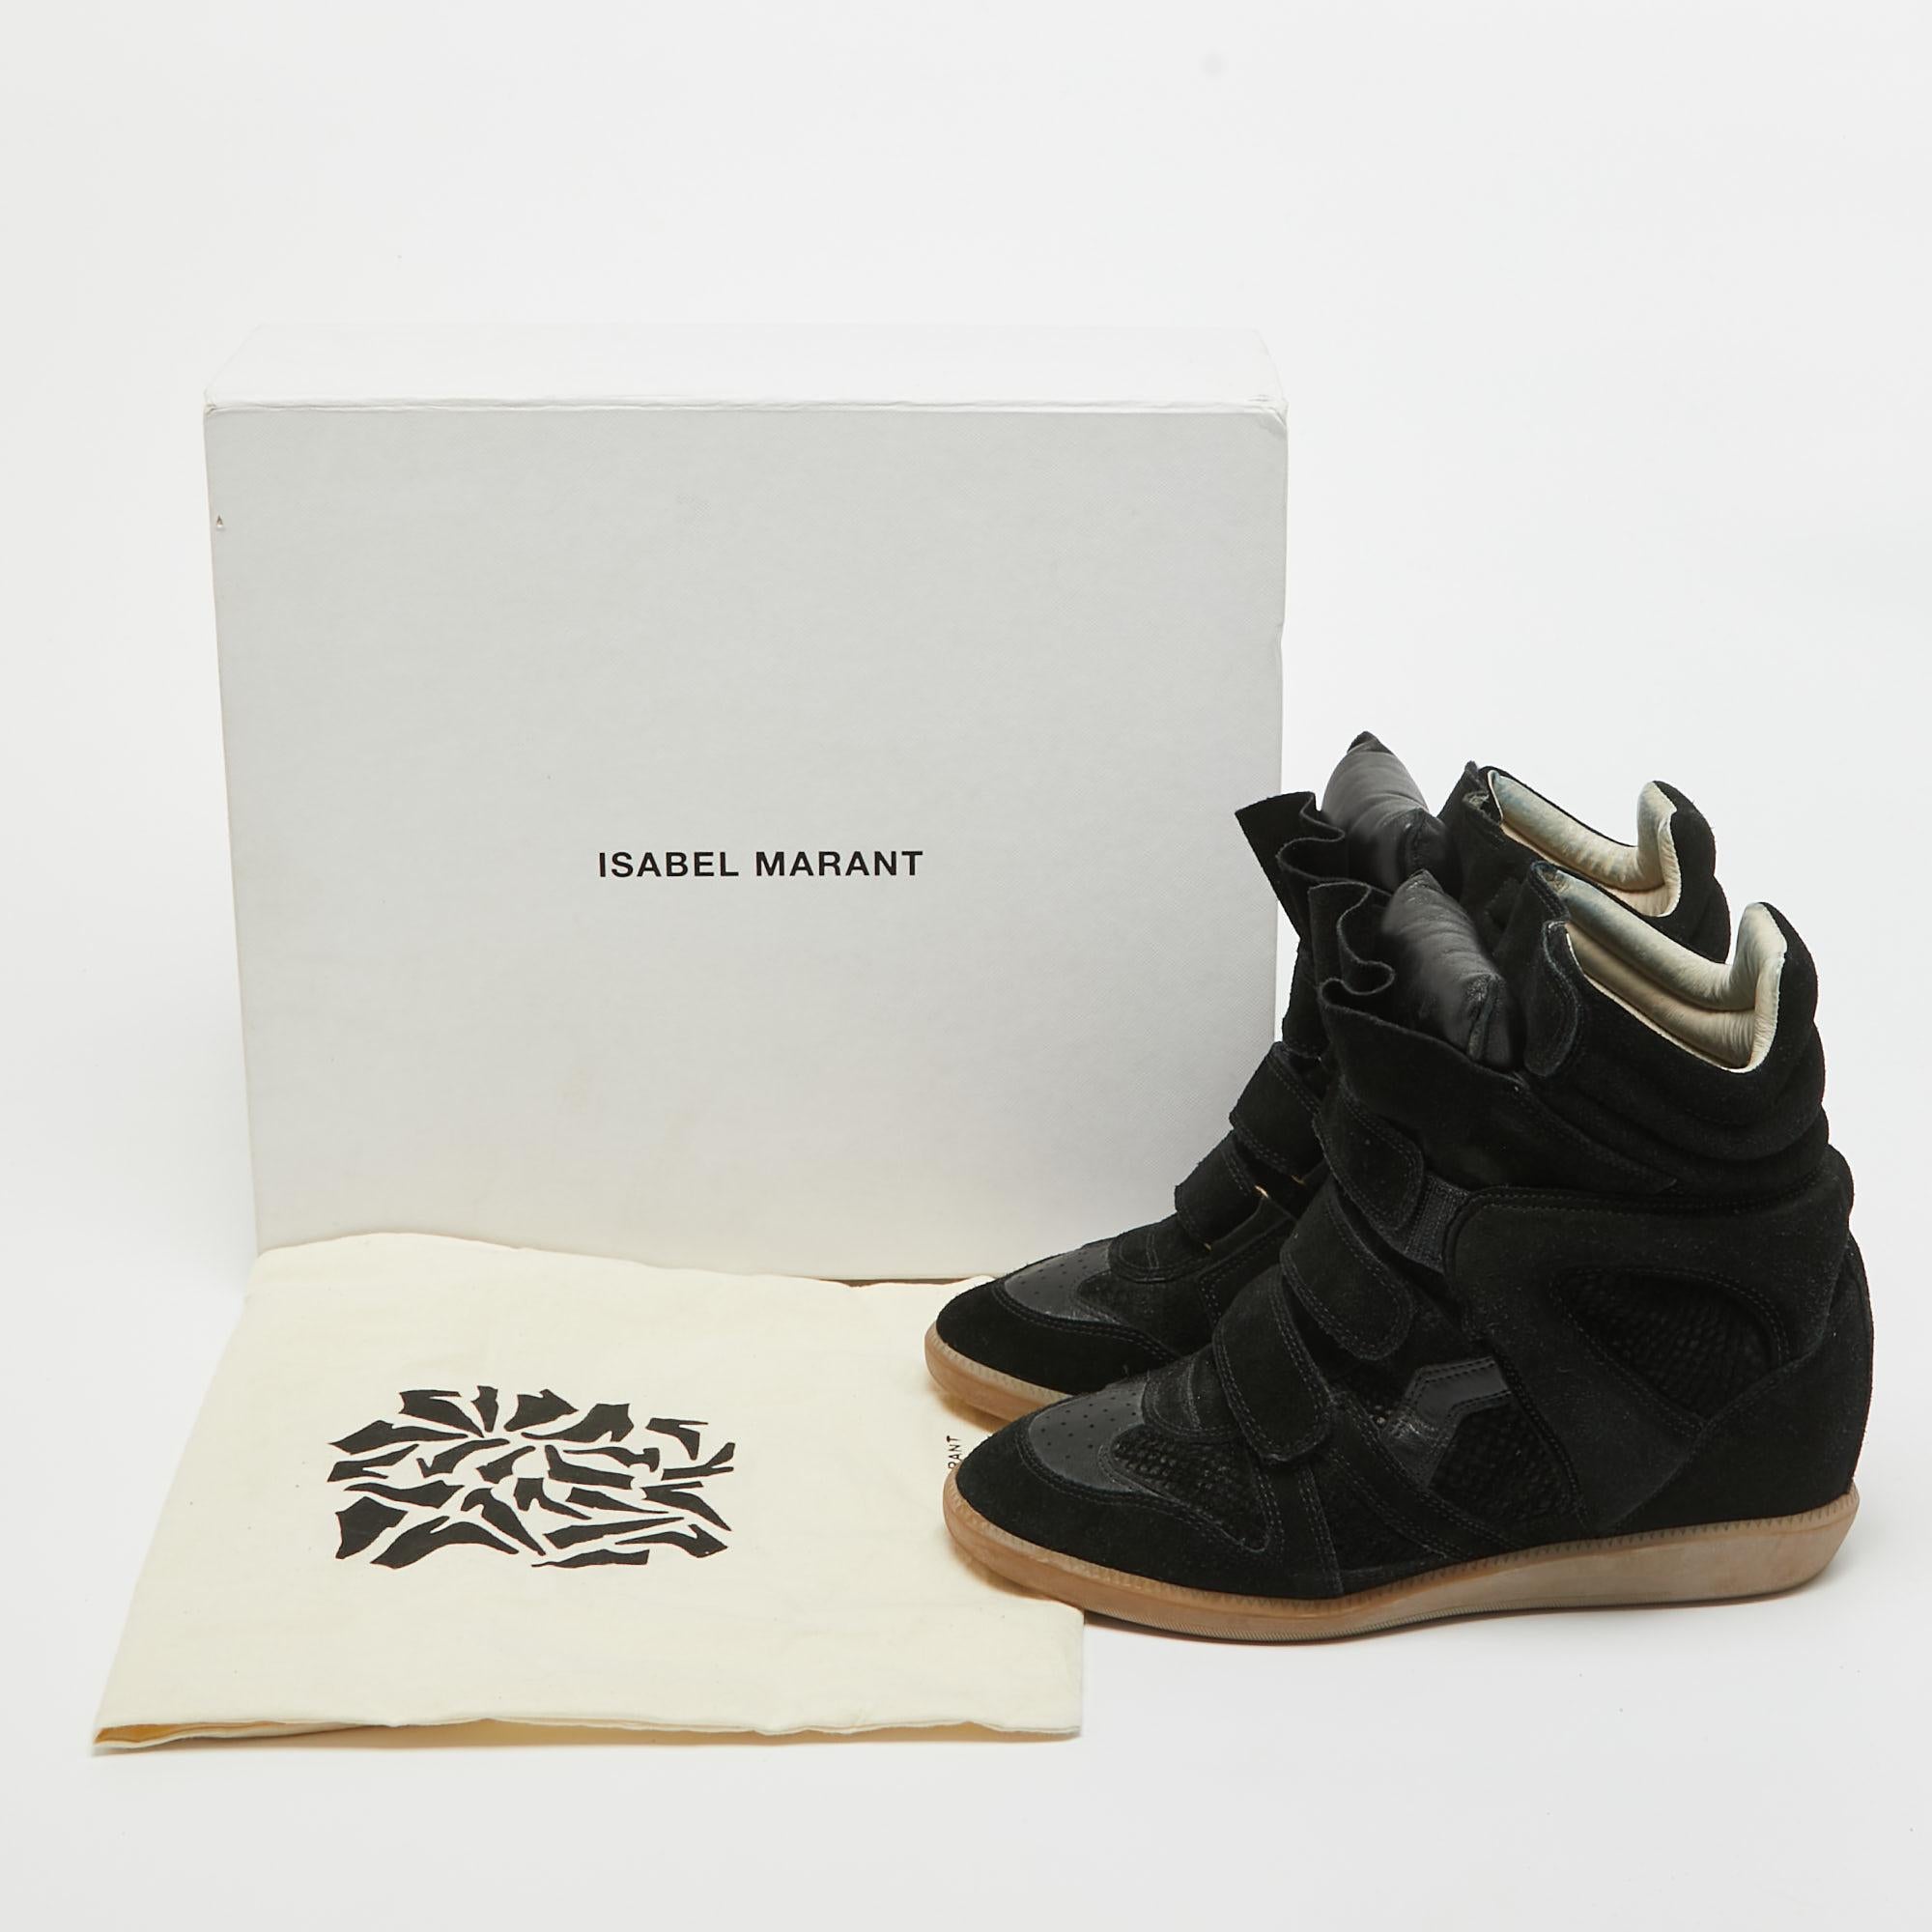 Isabel Marant Black Leather and Suede Over Basket Wedge High Top Sneakers Size 3 Pour femmes en vente